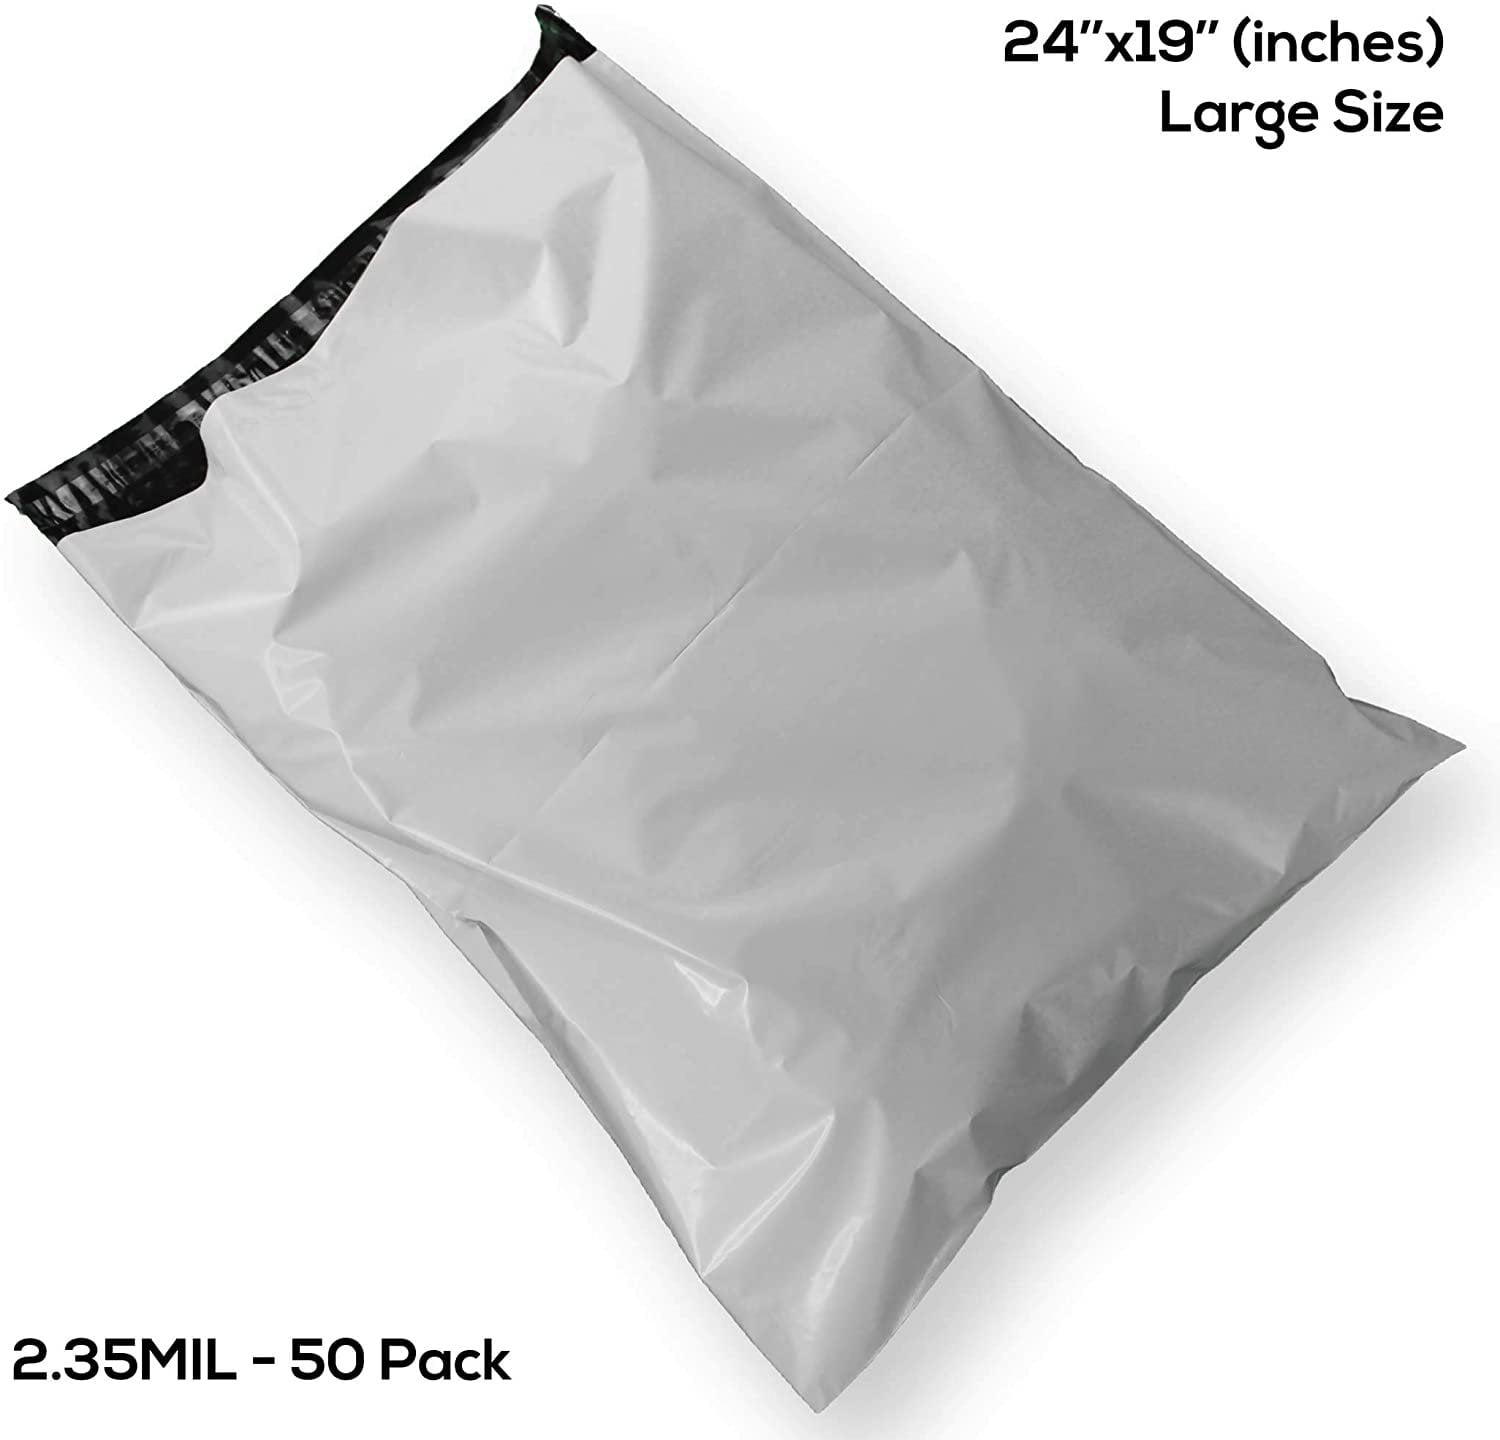 Strong Quality Off WHITE Plastic Mailing Postage Bags Poly Post Mail ALL SIZES 